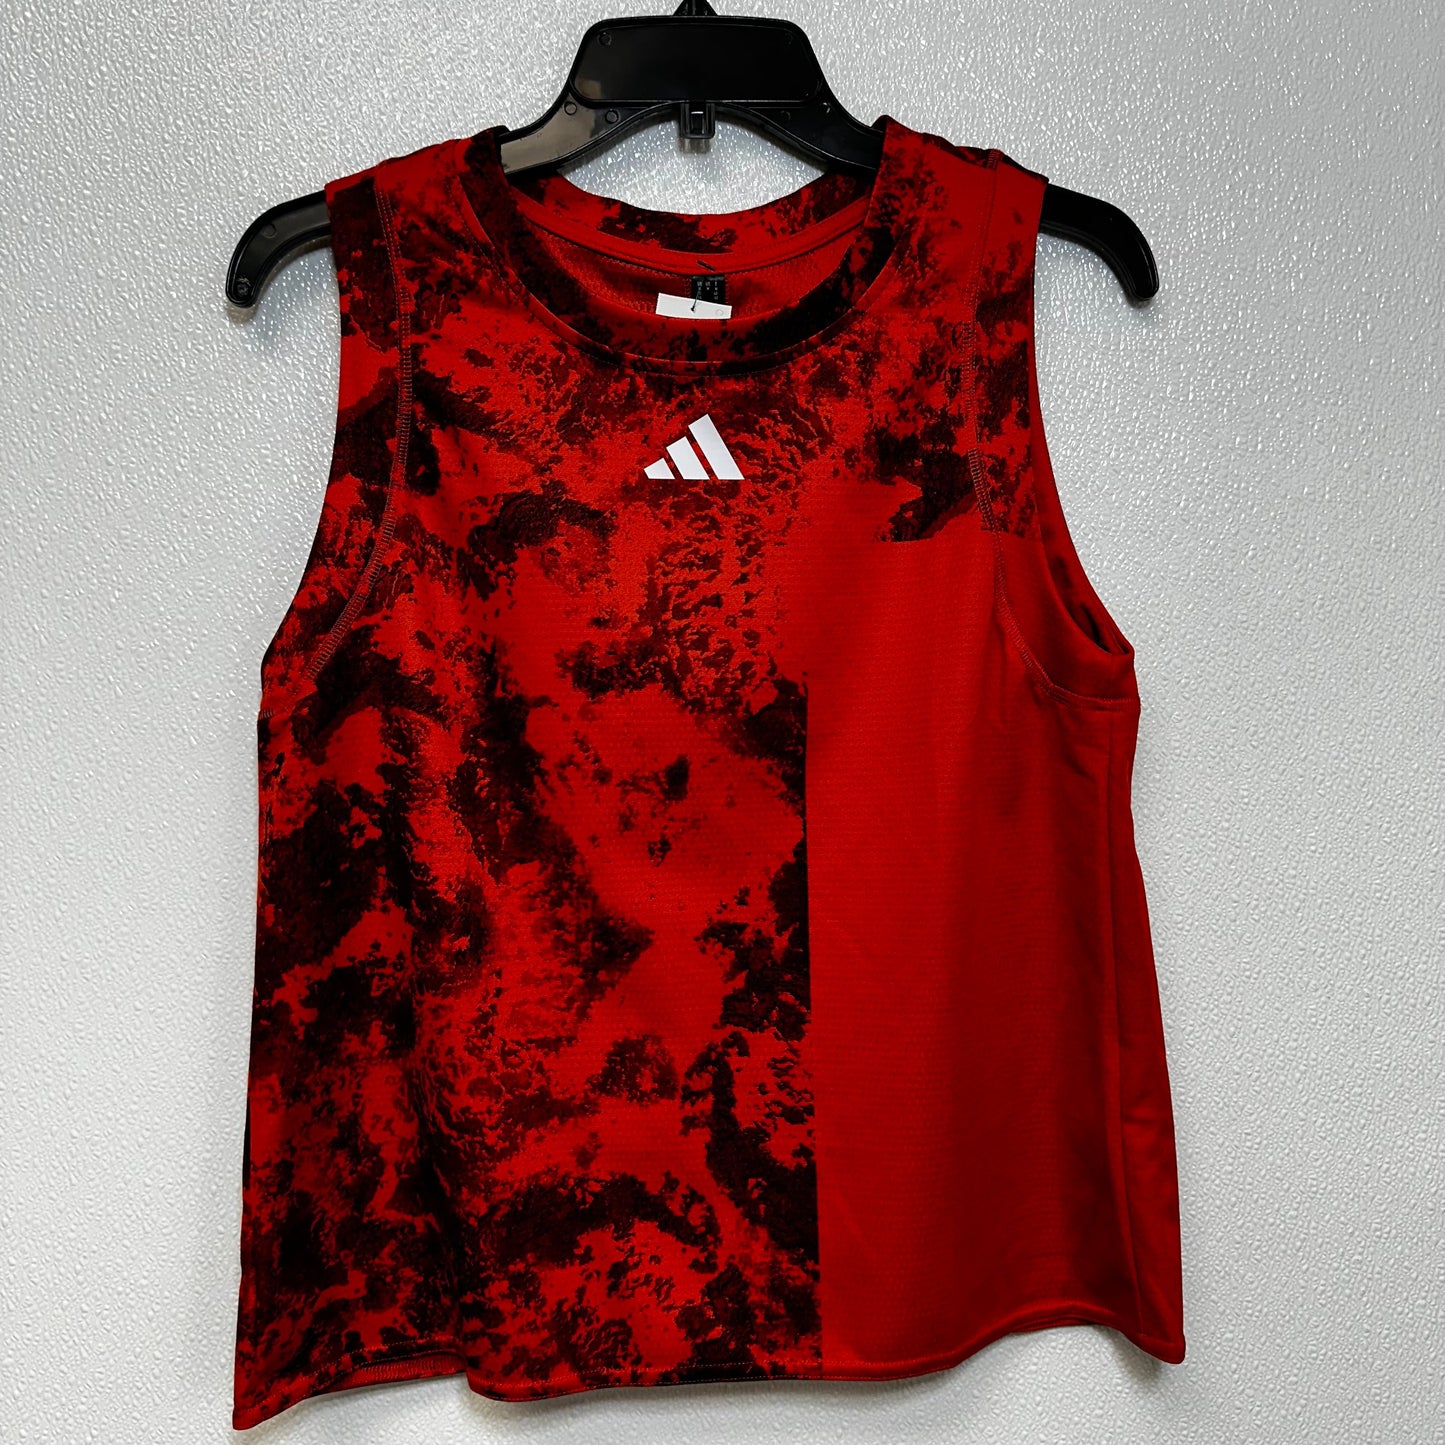 Red Athletic Tank Top Adidas, Size M